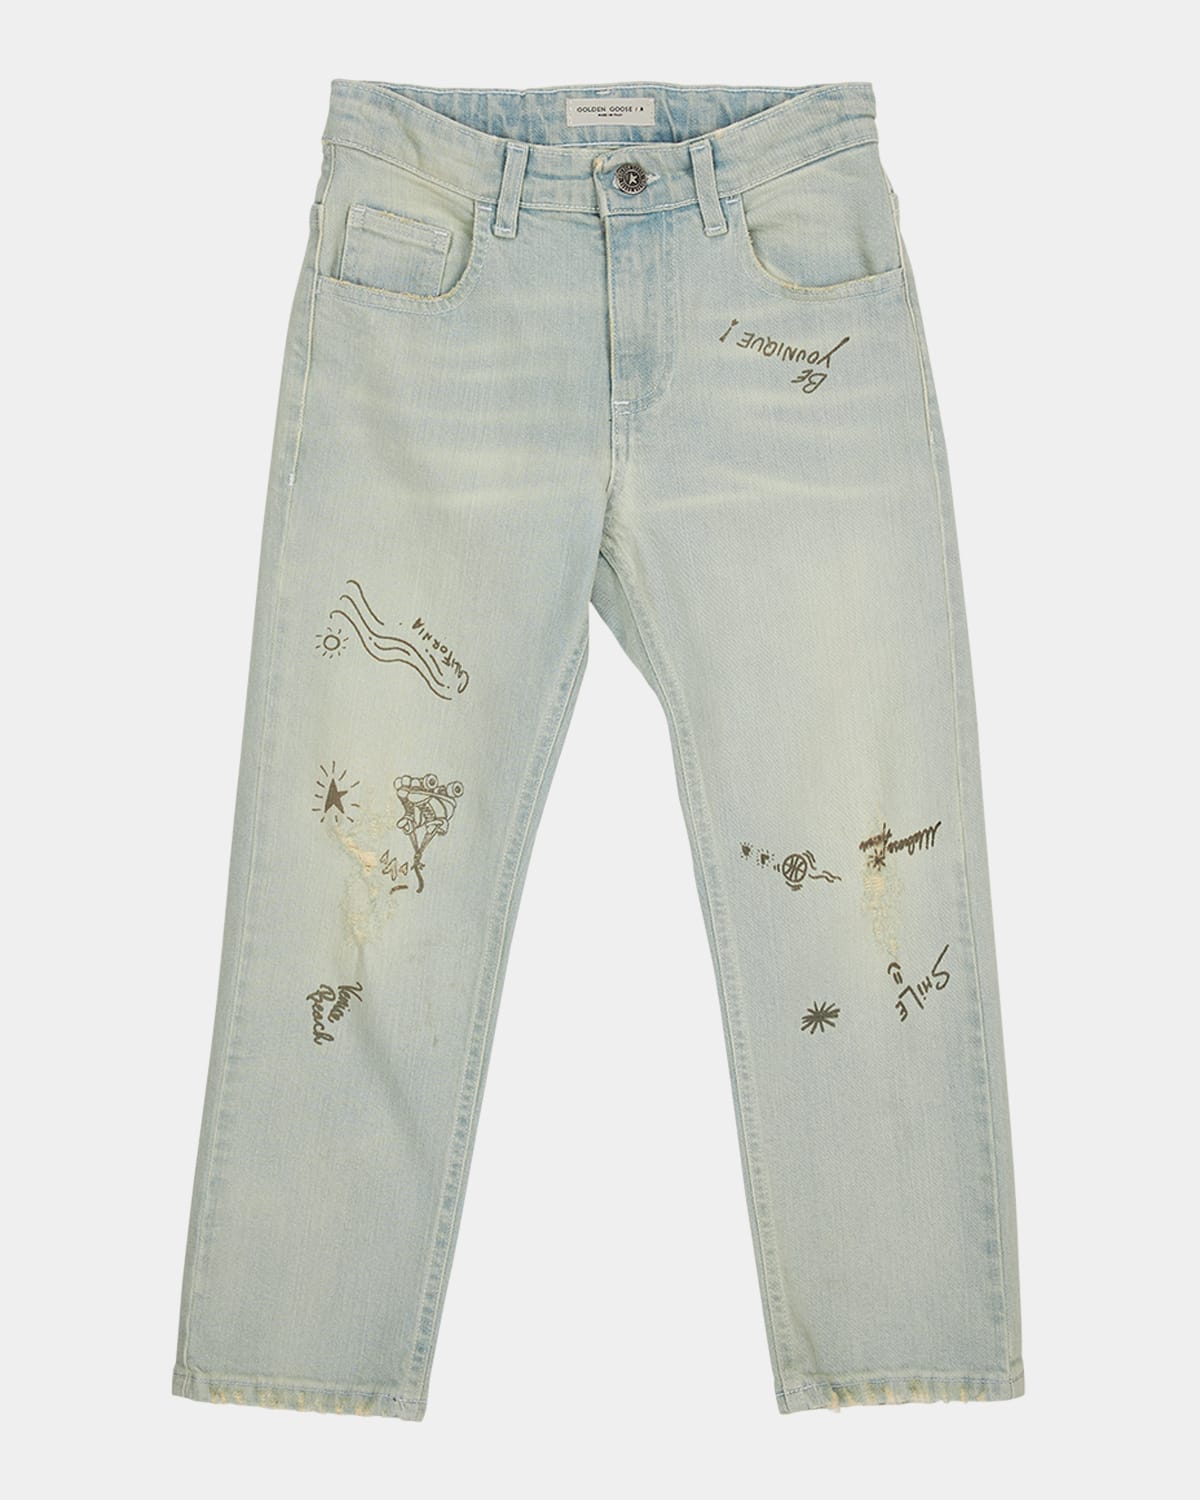 Boy's Doodle-Print Bleached Washed Jeans, Size 12